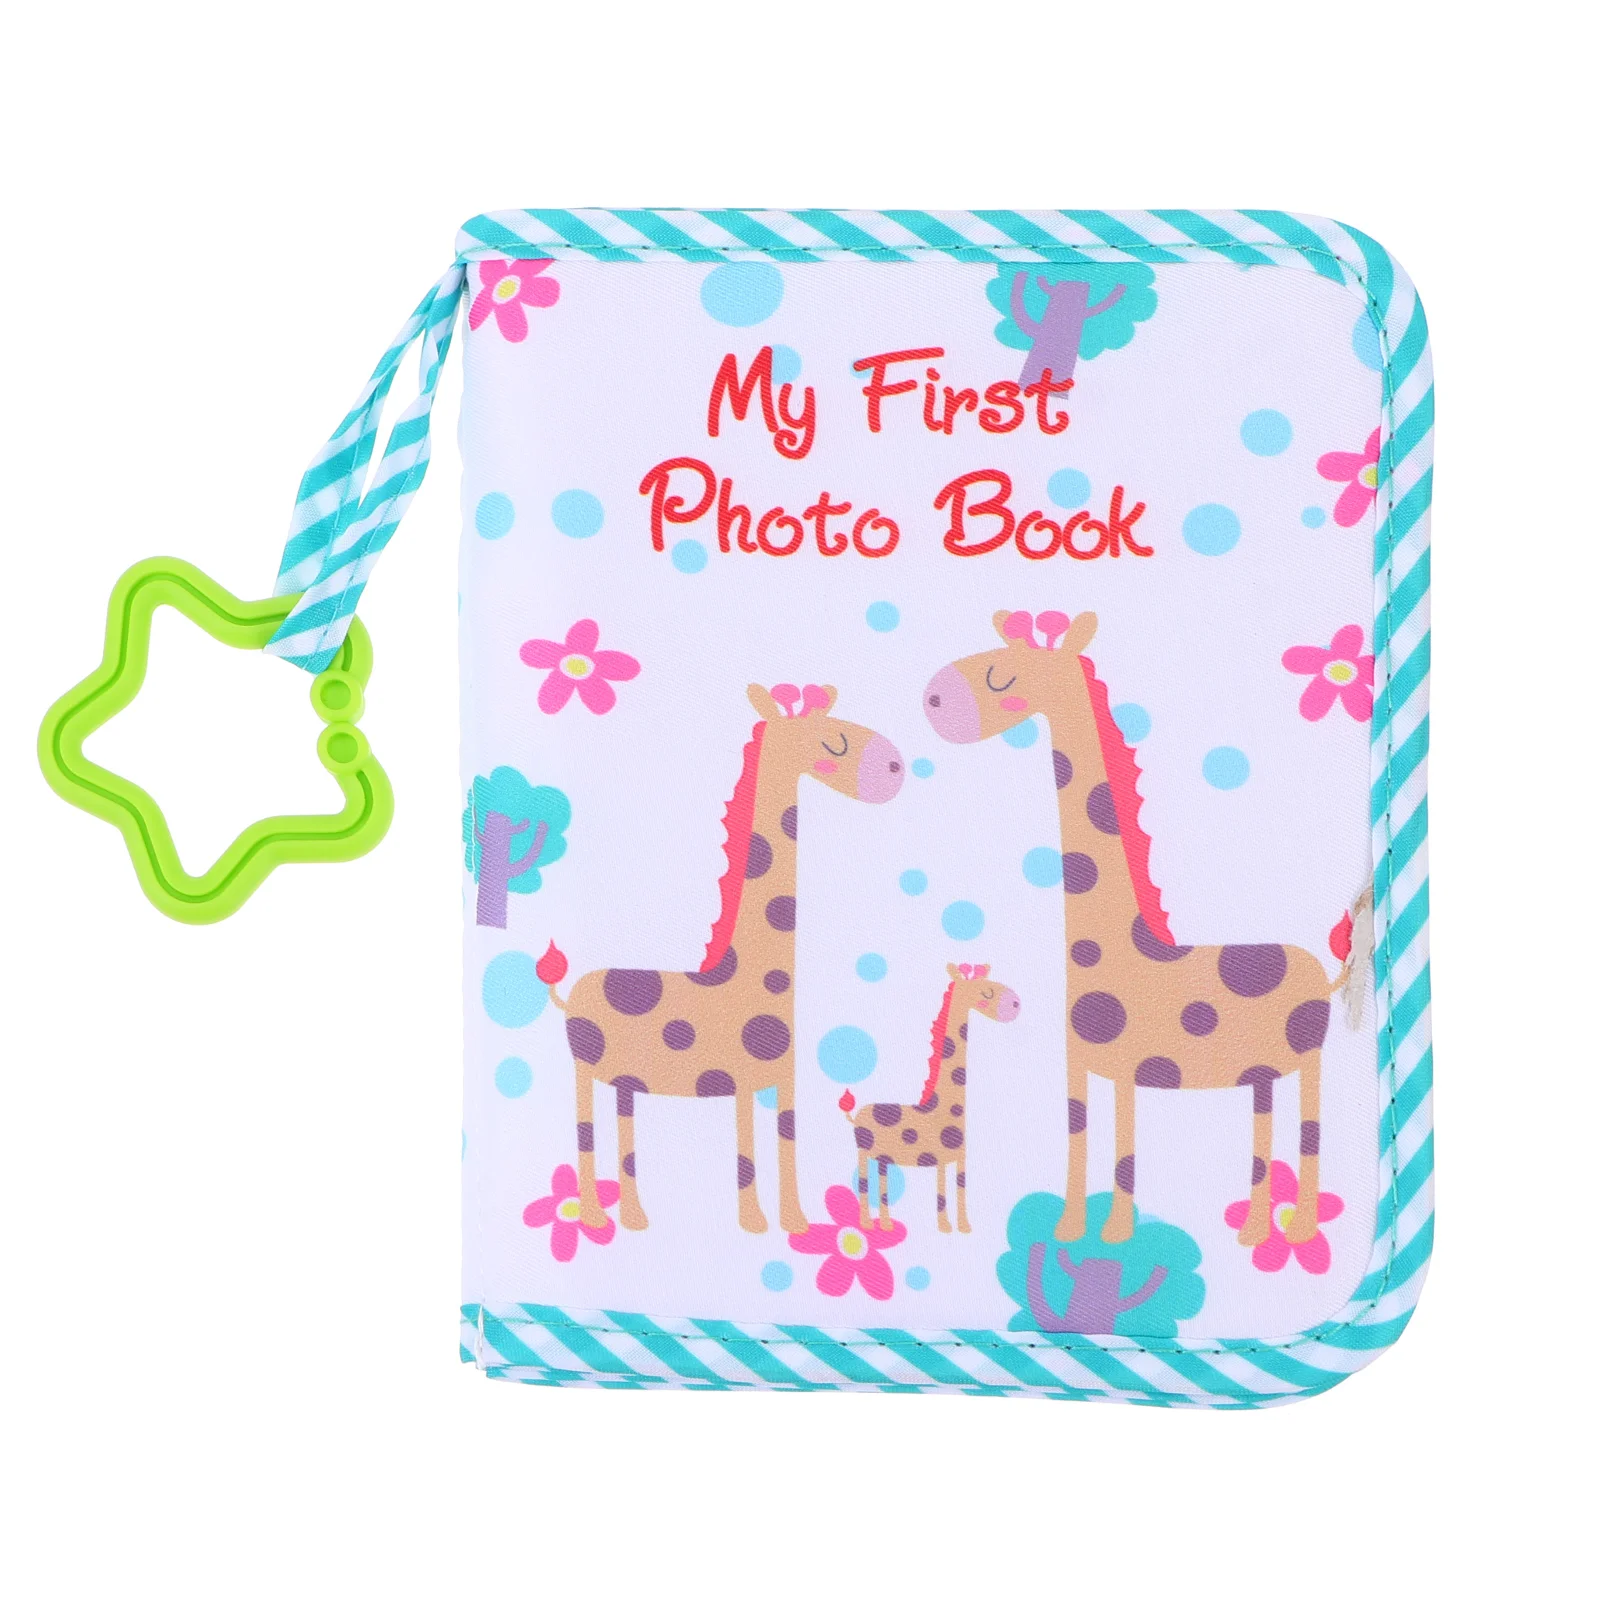 

Album Baby Photo Book First Books Memory Yearfamily My Picture Albums Cloth Fabric Diy Growth Babys Babies Guest Shower Infant